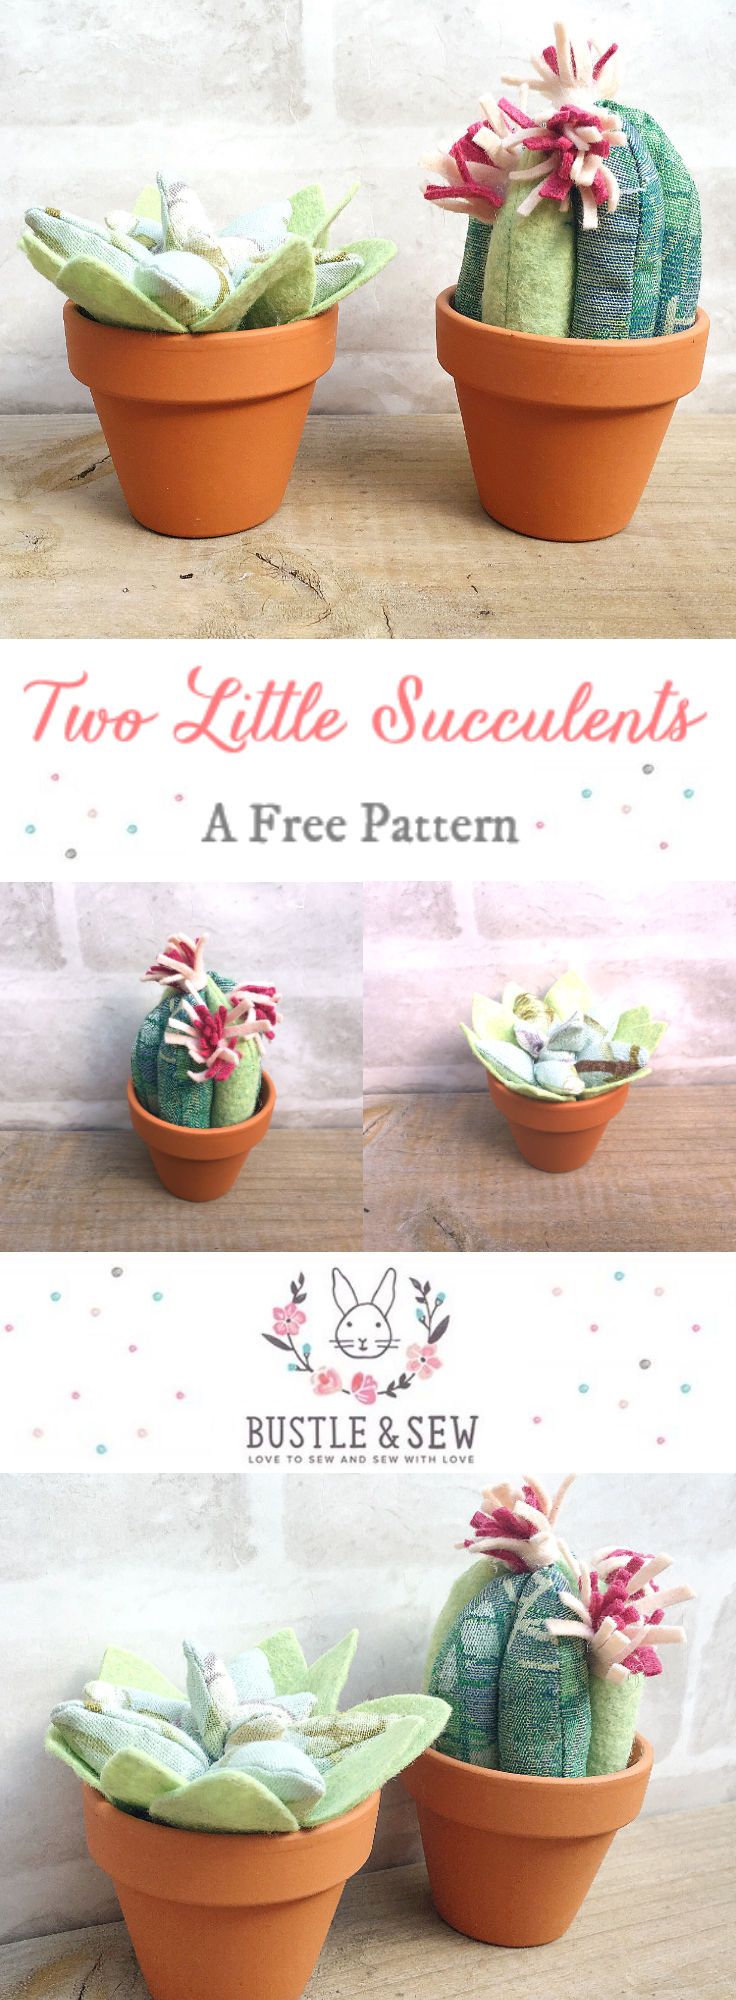 Succulents by Bustle & Sew